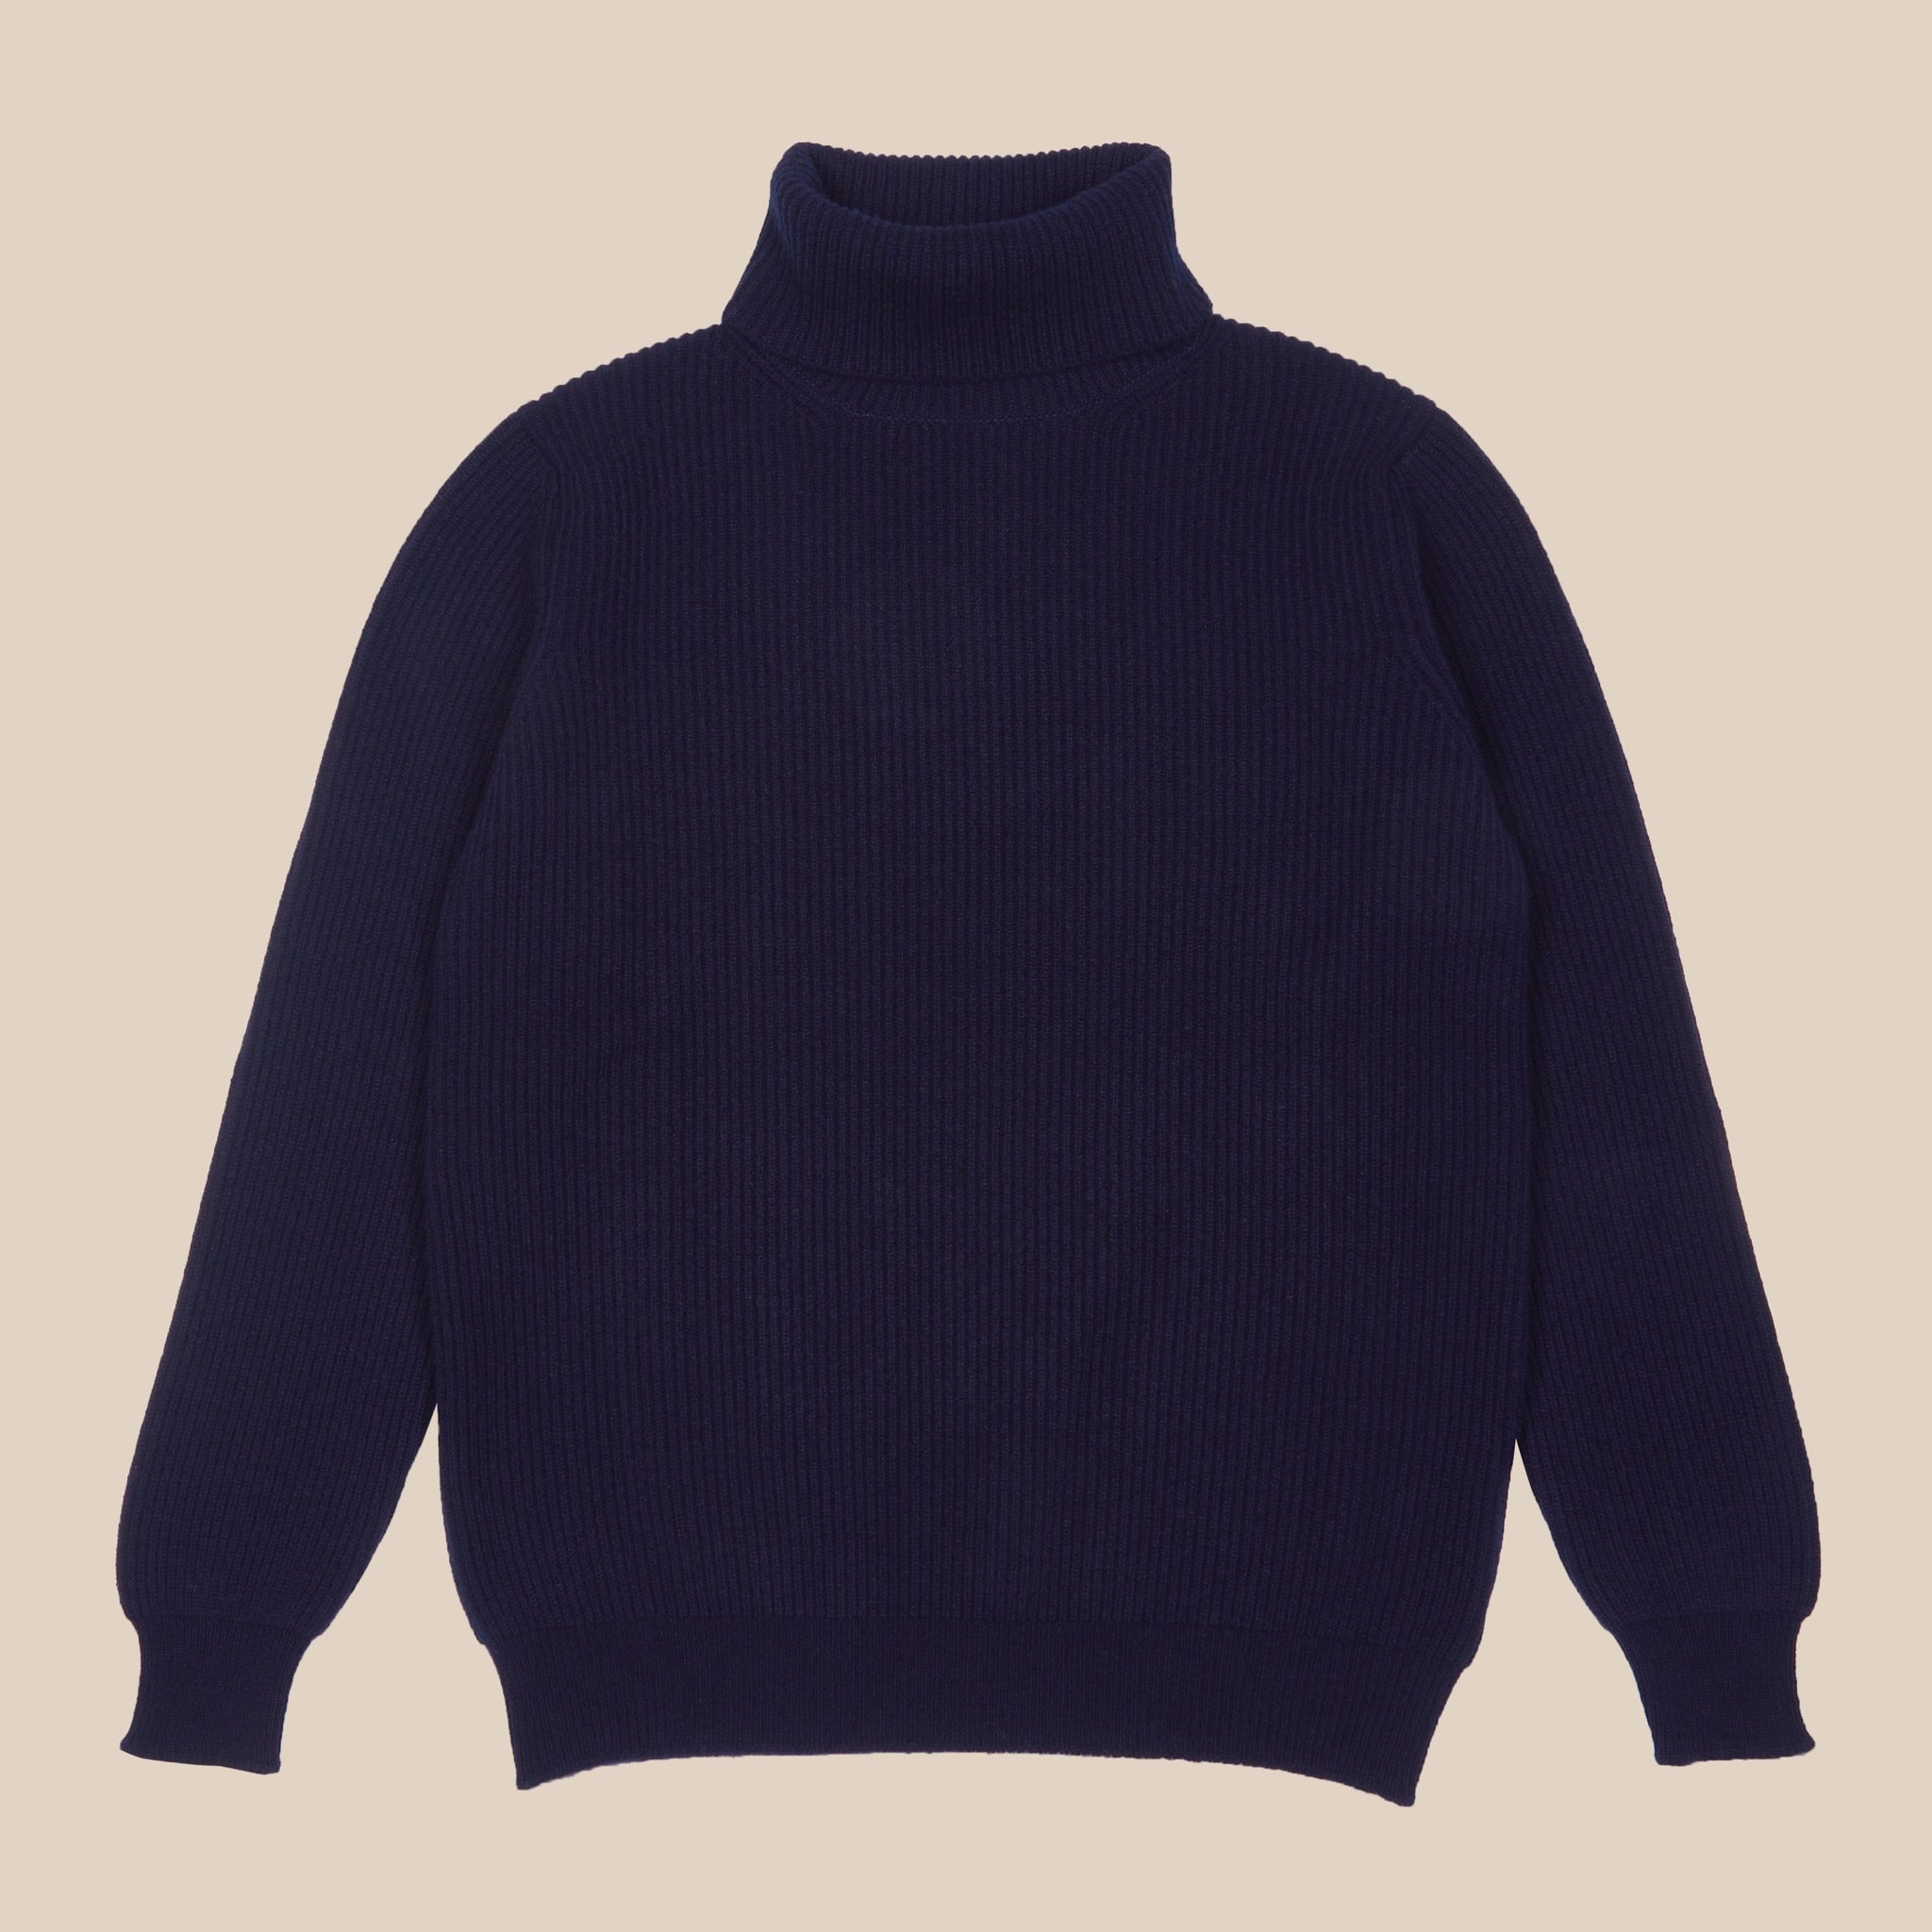 Cashmere ribbed submariner rollneck in navy - Colhay's